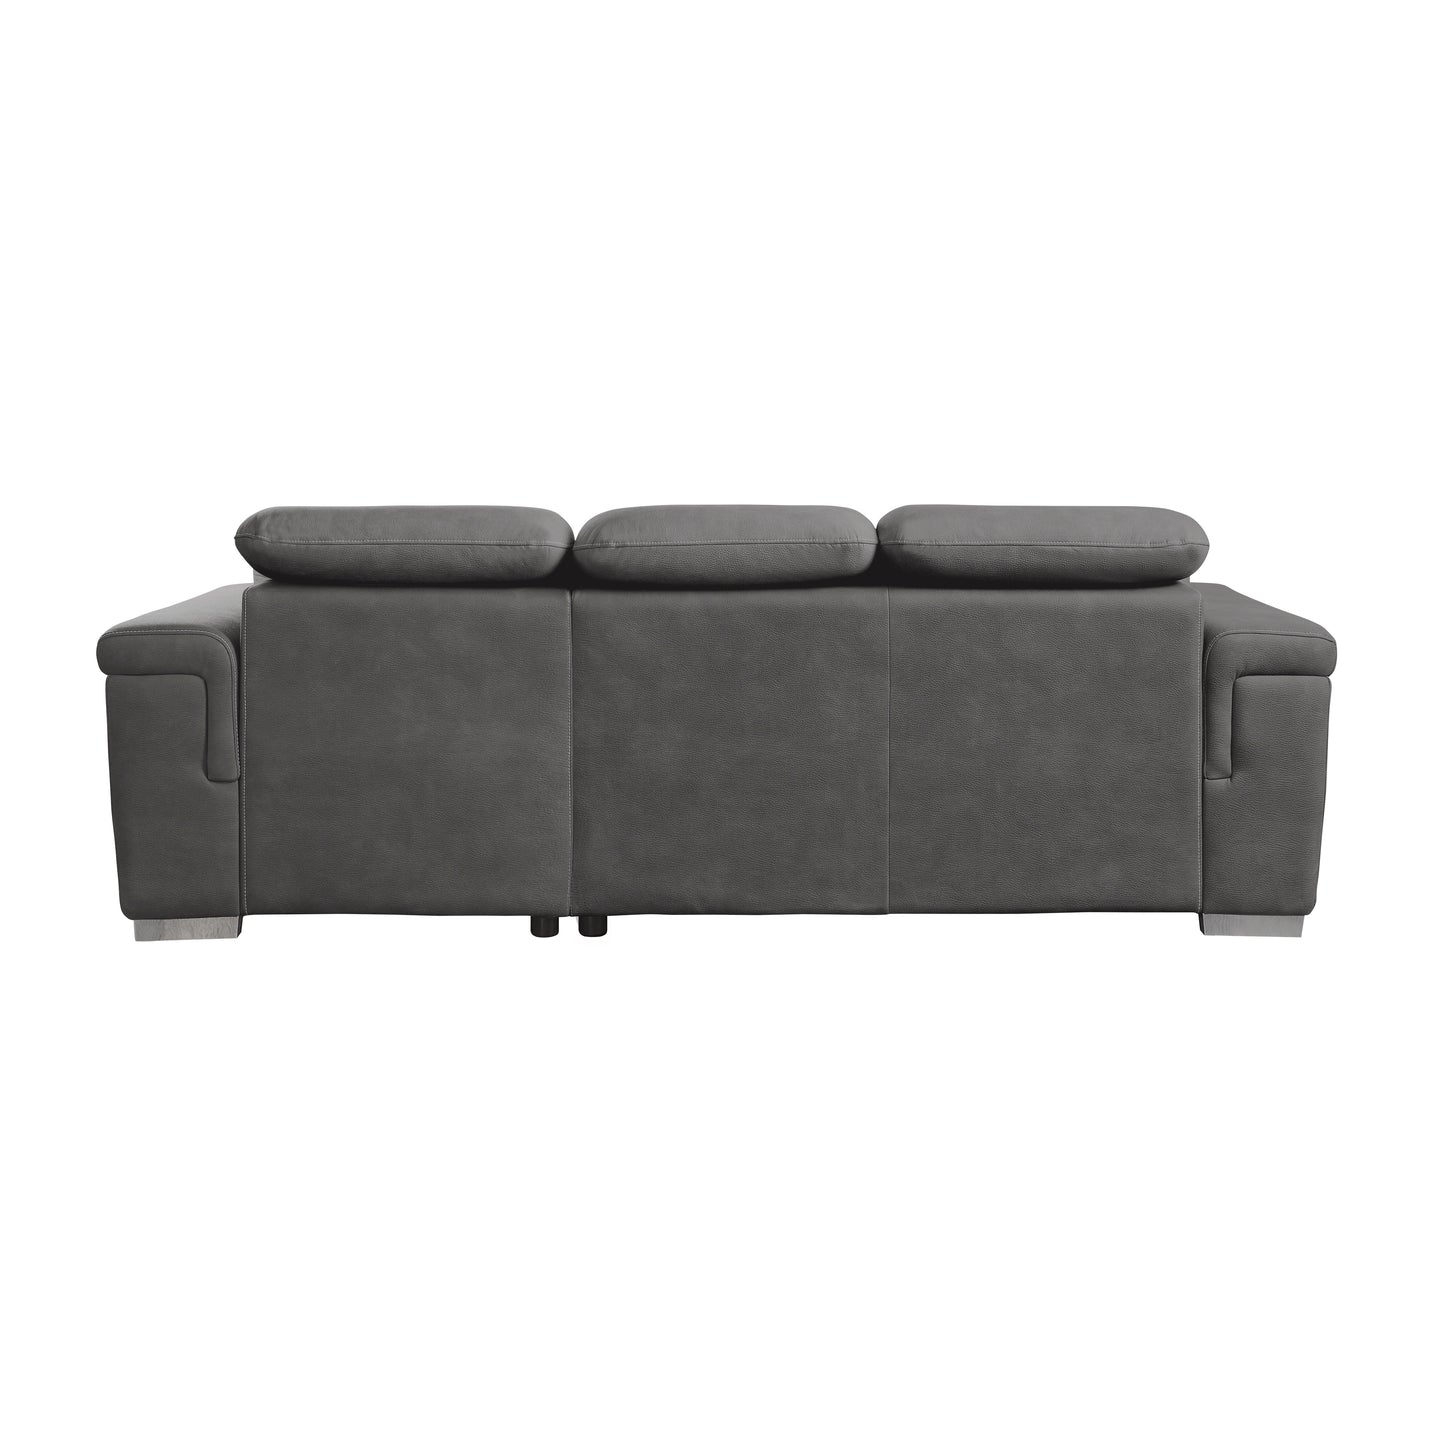 Alfio 2-Pcs Sectional w/ Adj. Headrests, Pull-out Bed & Right Chaise w/ Hidden Storage GREY